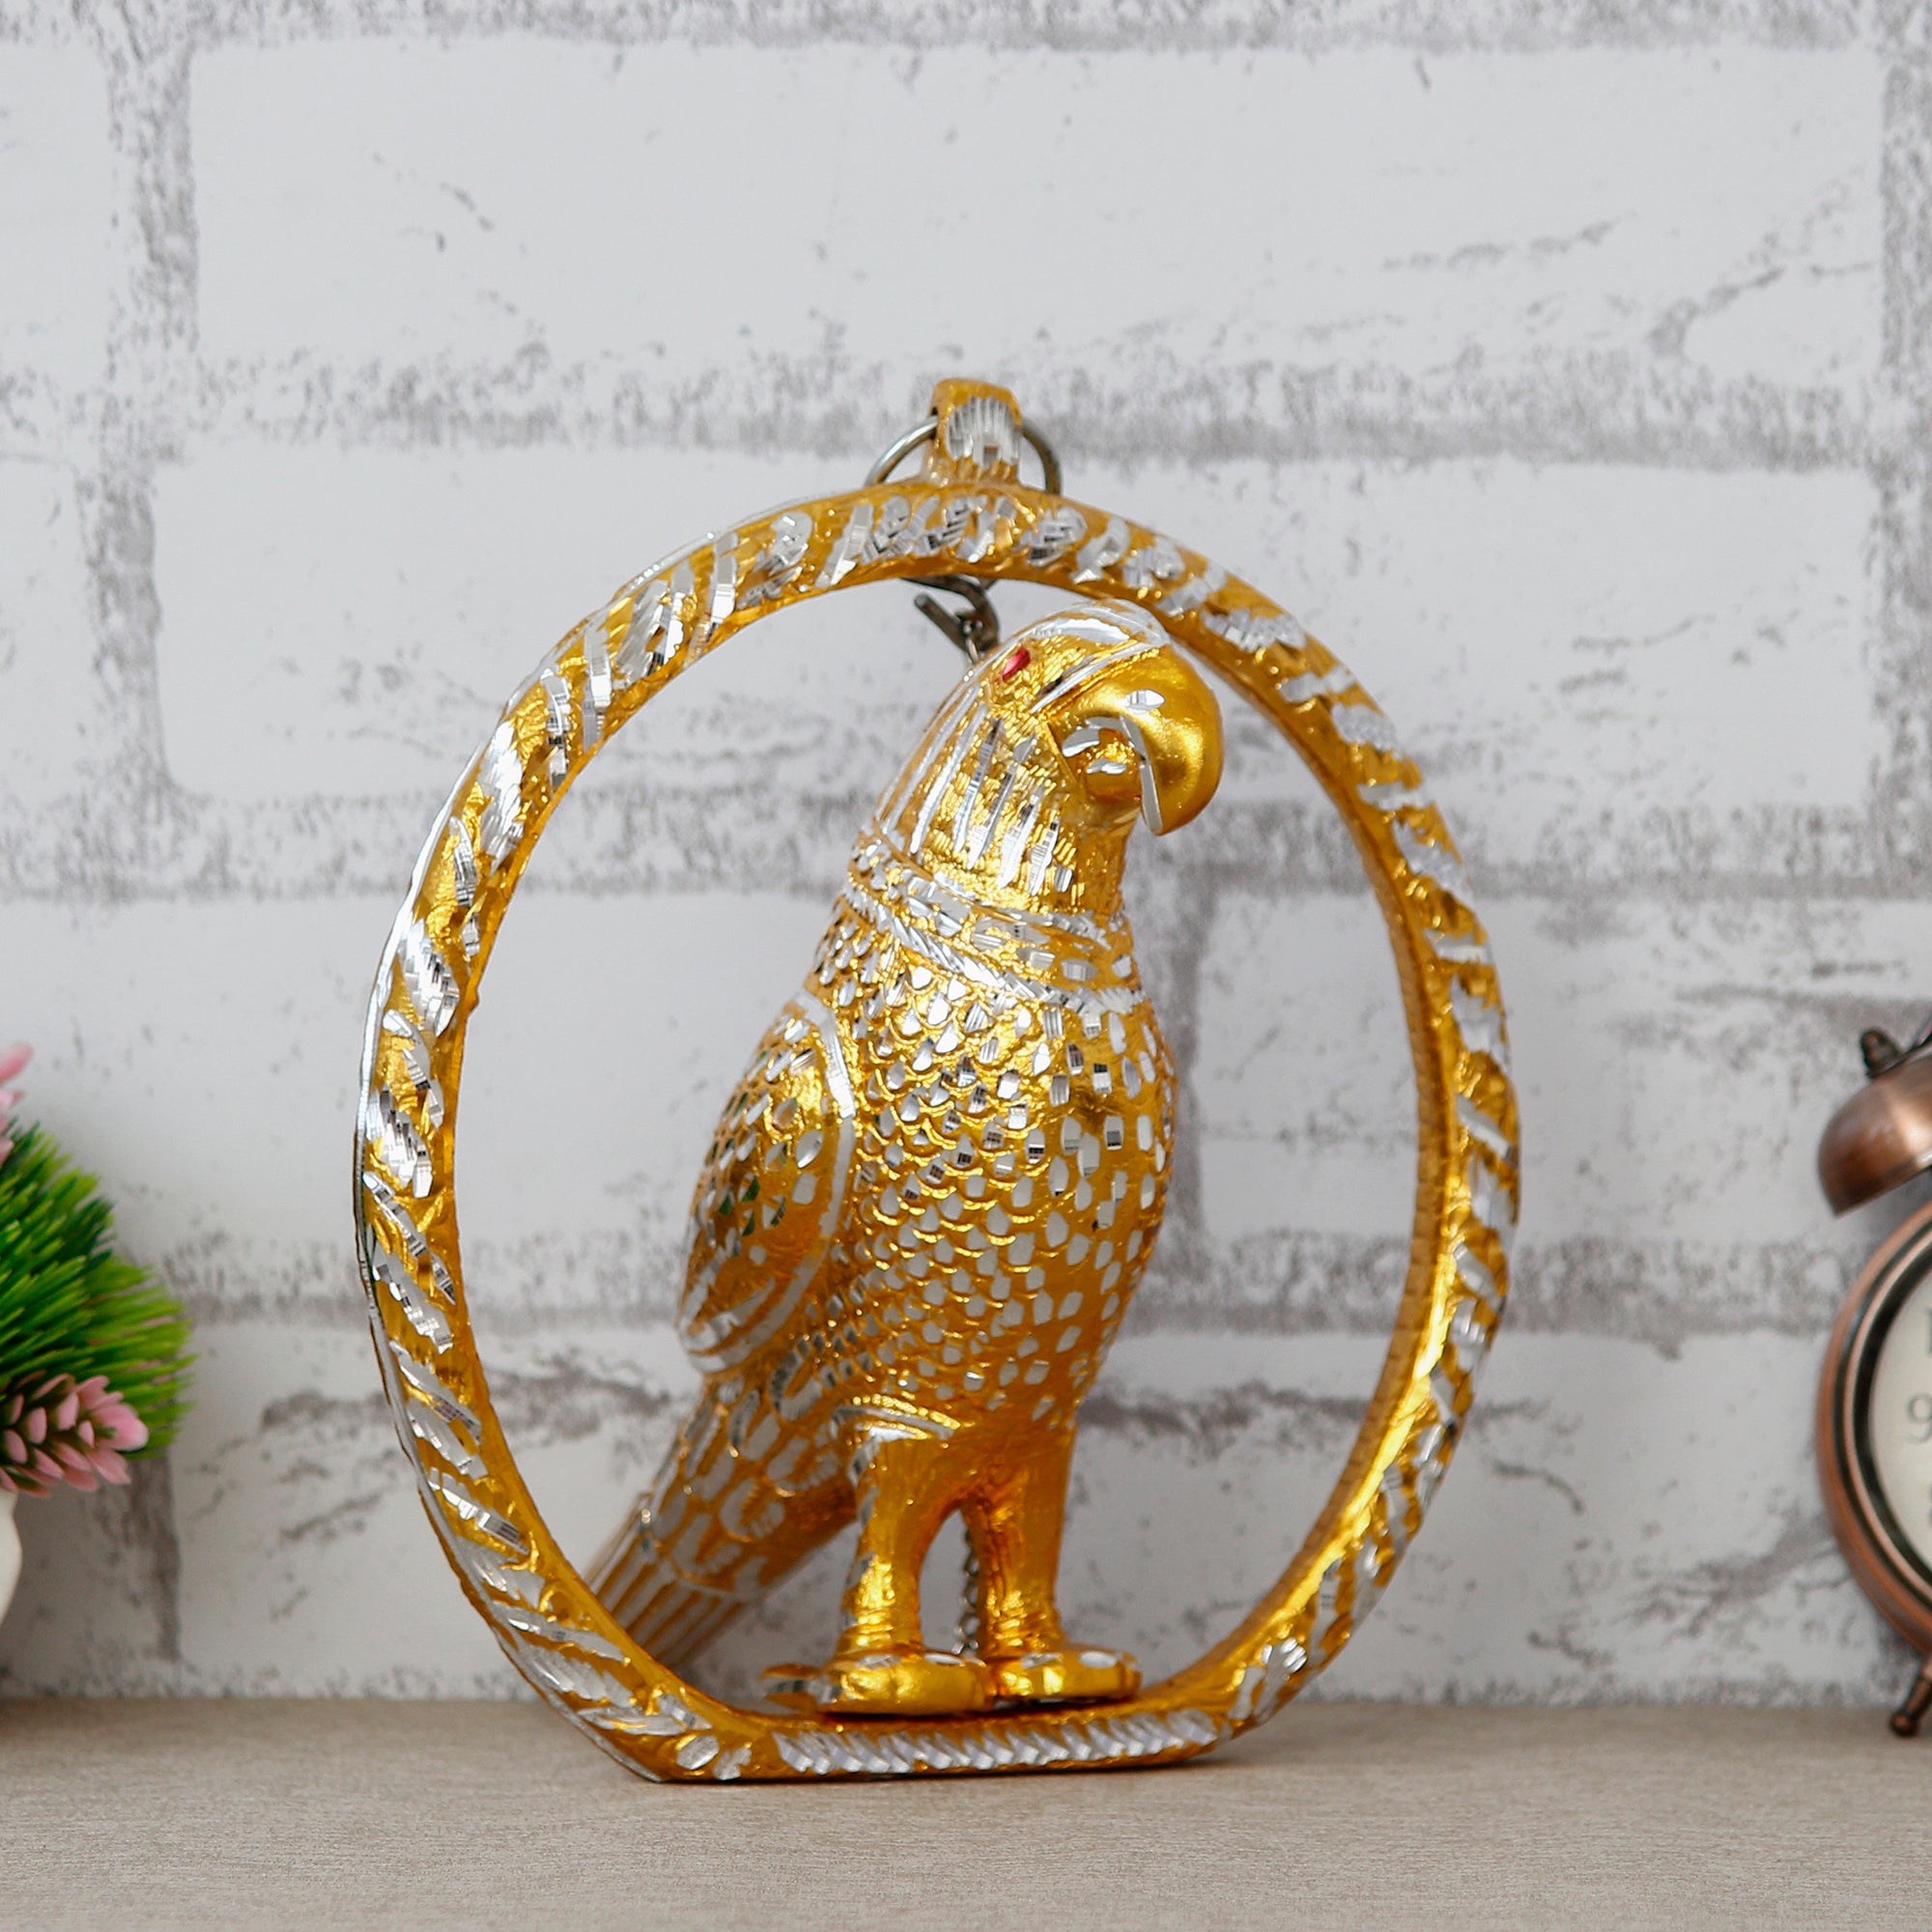 Metal Carved Golden Parrot Statue Decorative Wall Hanging Showpiece with Chain 3